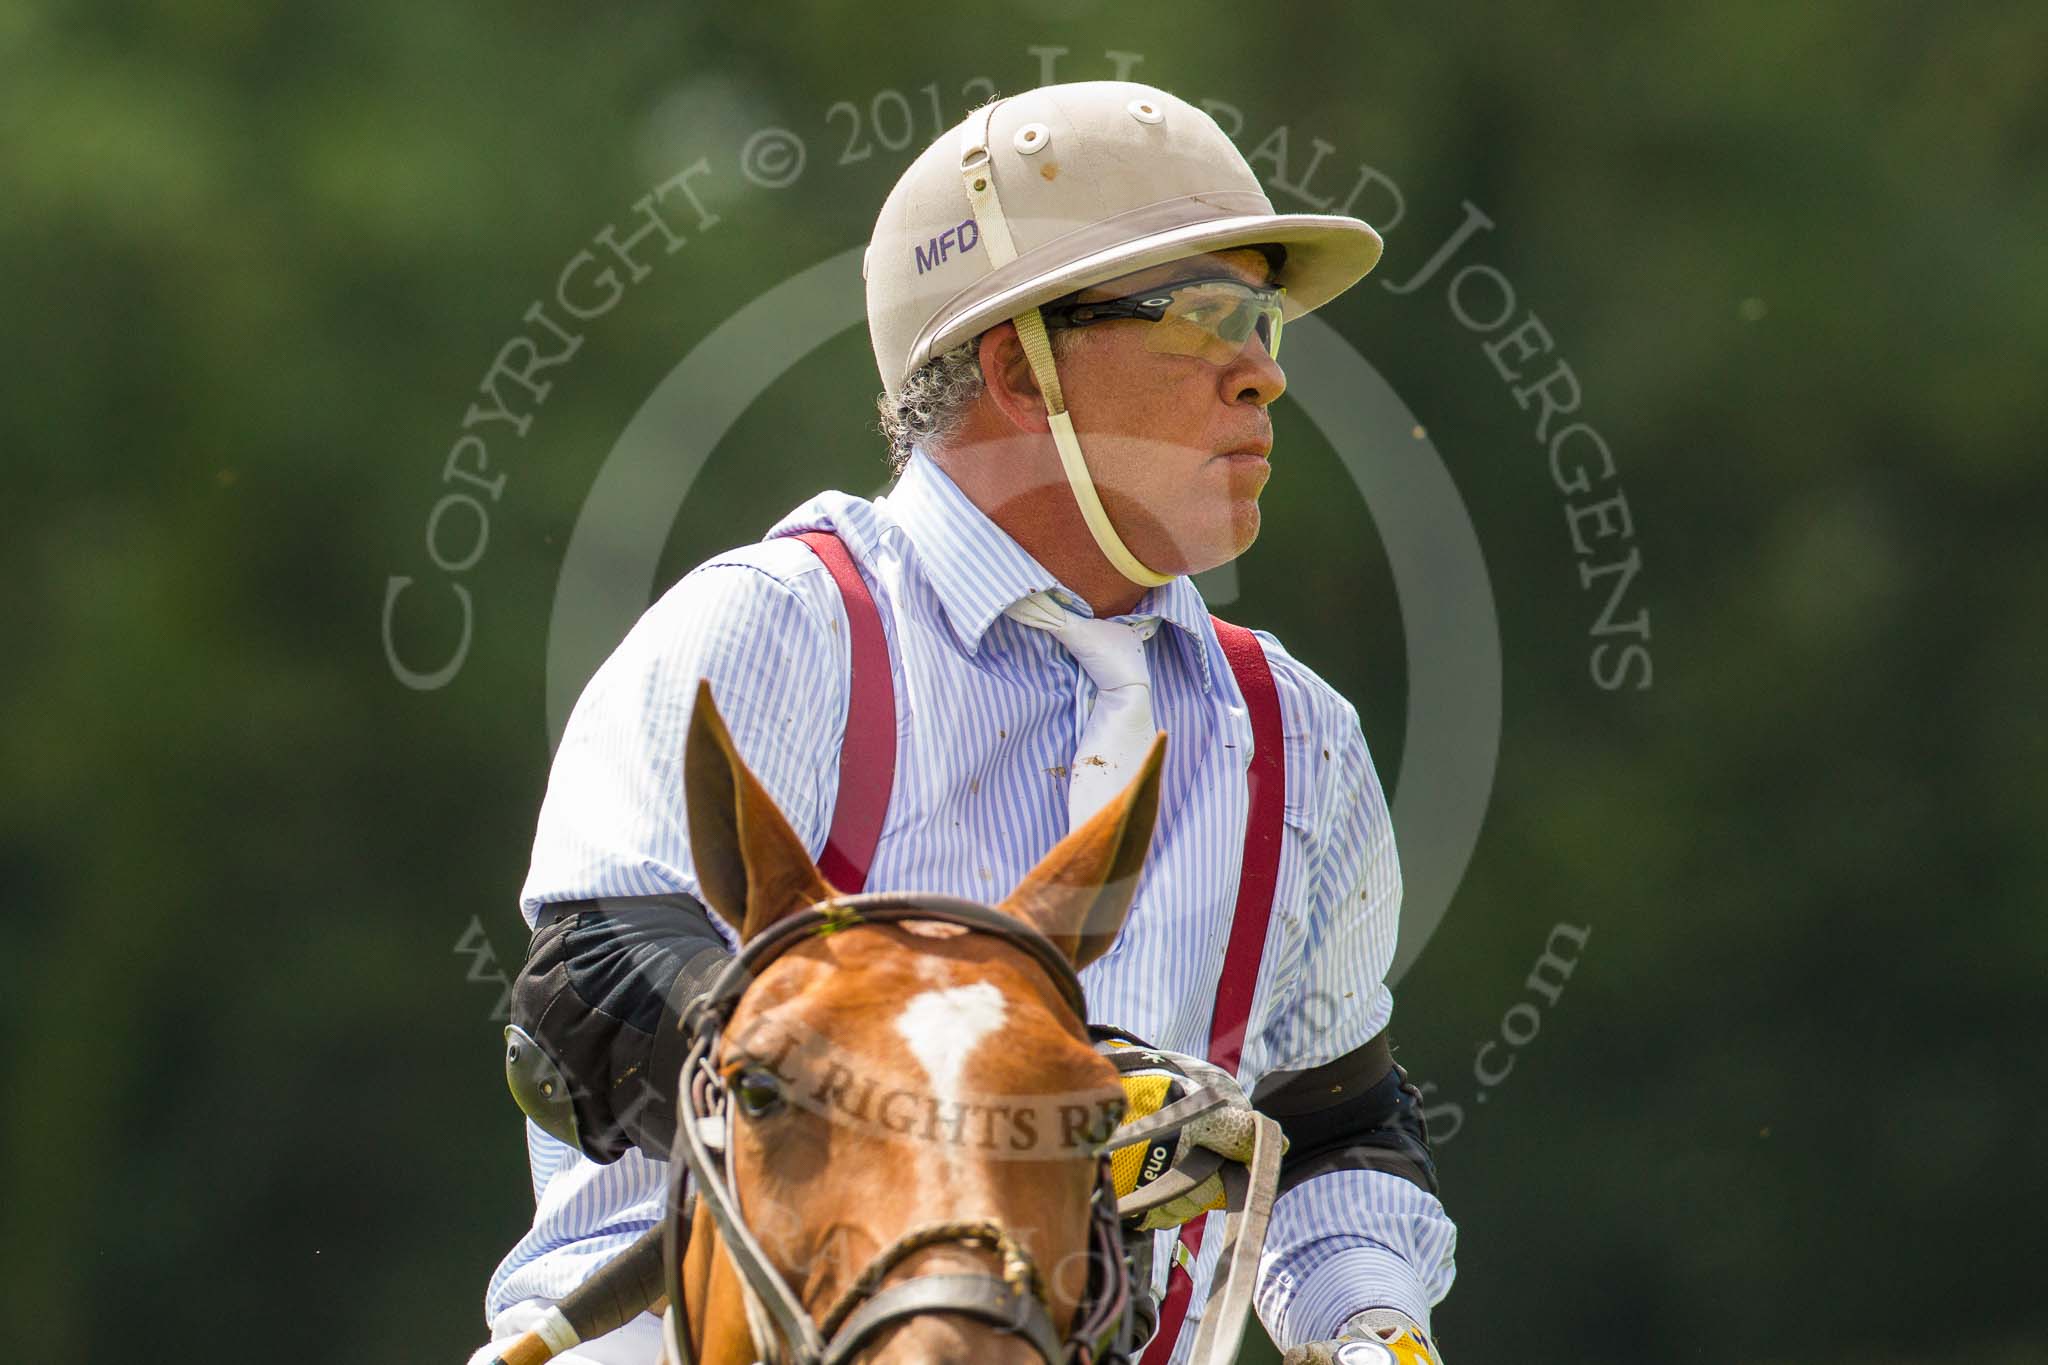 7th Heritage Polo Cup finals: T.M.Lewin Official Shirt & Tie Sponsor, Mariano Darritchon, La Mariposa Argentina Polo Team..
Hurtwood Park Polo Club,
Ewhurst Green,
Surrey,
United Kingdom,
on 05 August 2012 at 13:41, image #44